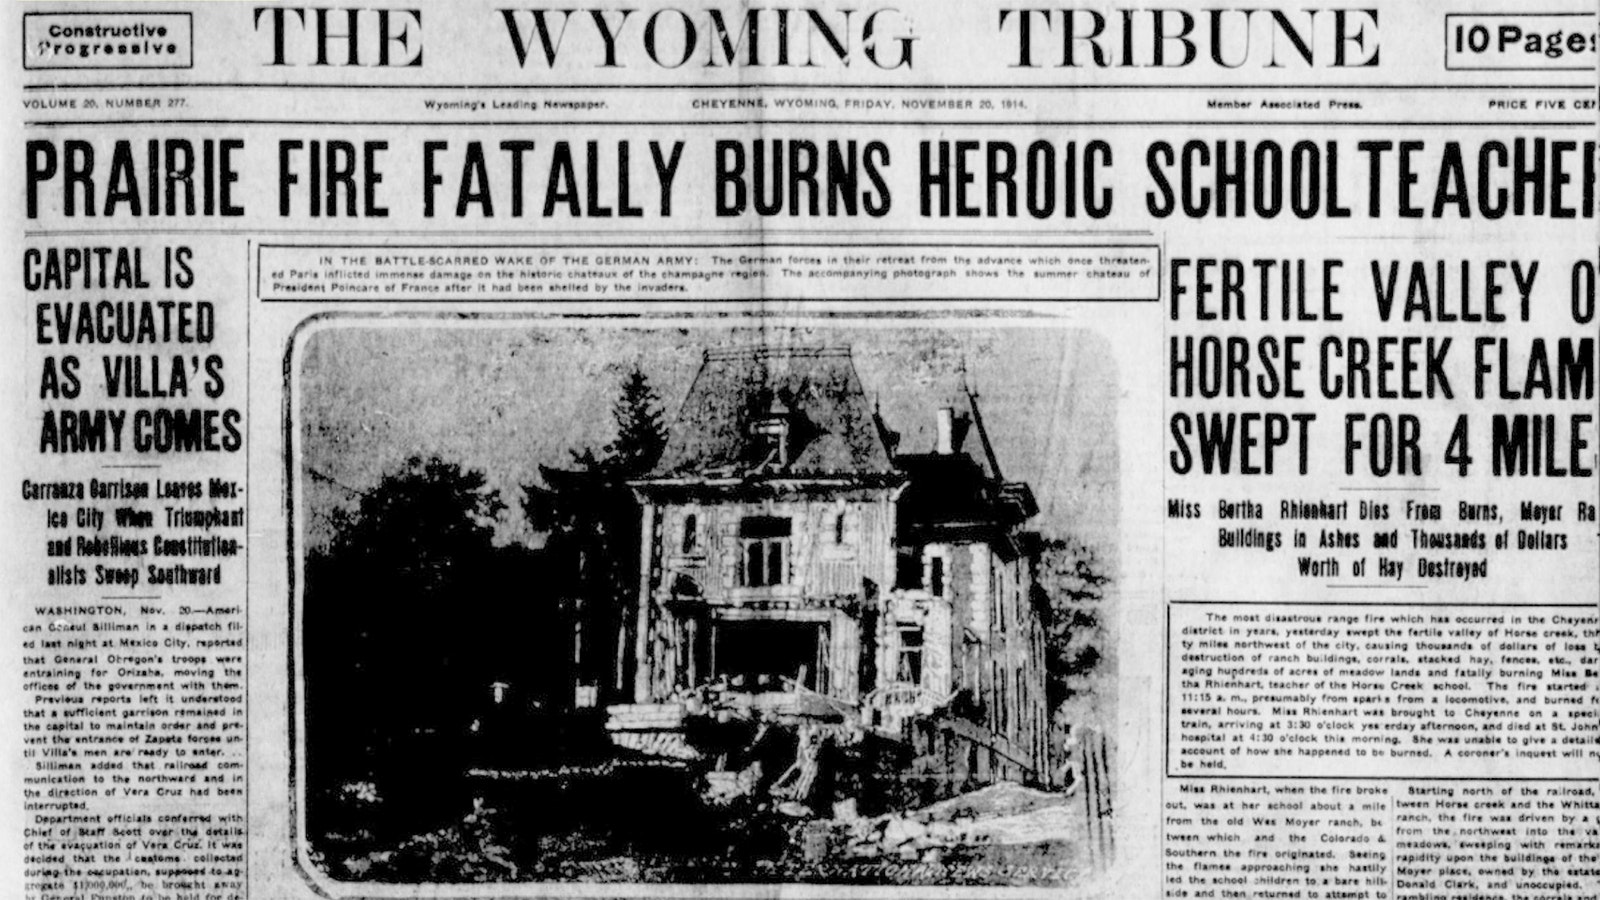 Newspapers in the Cheyenne region and in following days across the state and into Nebraska carried stories of Bertha Rhinehart’s heroism in saving her students from a prairie fire.